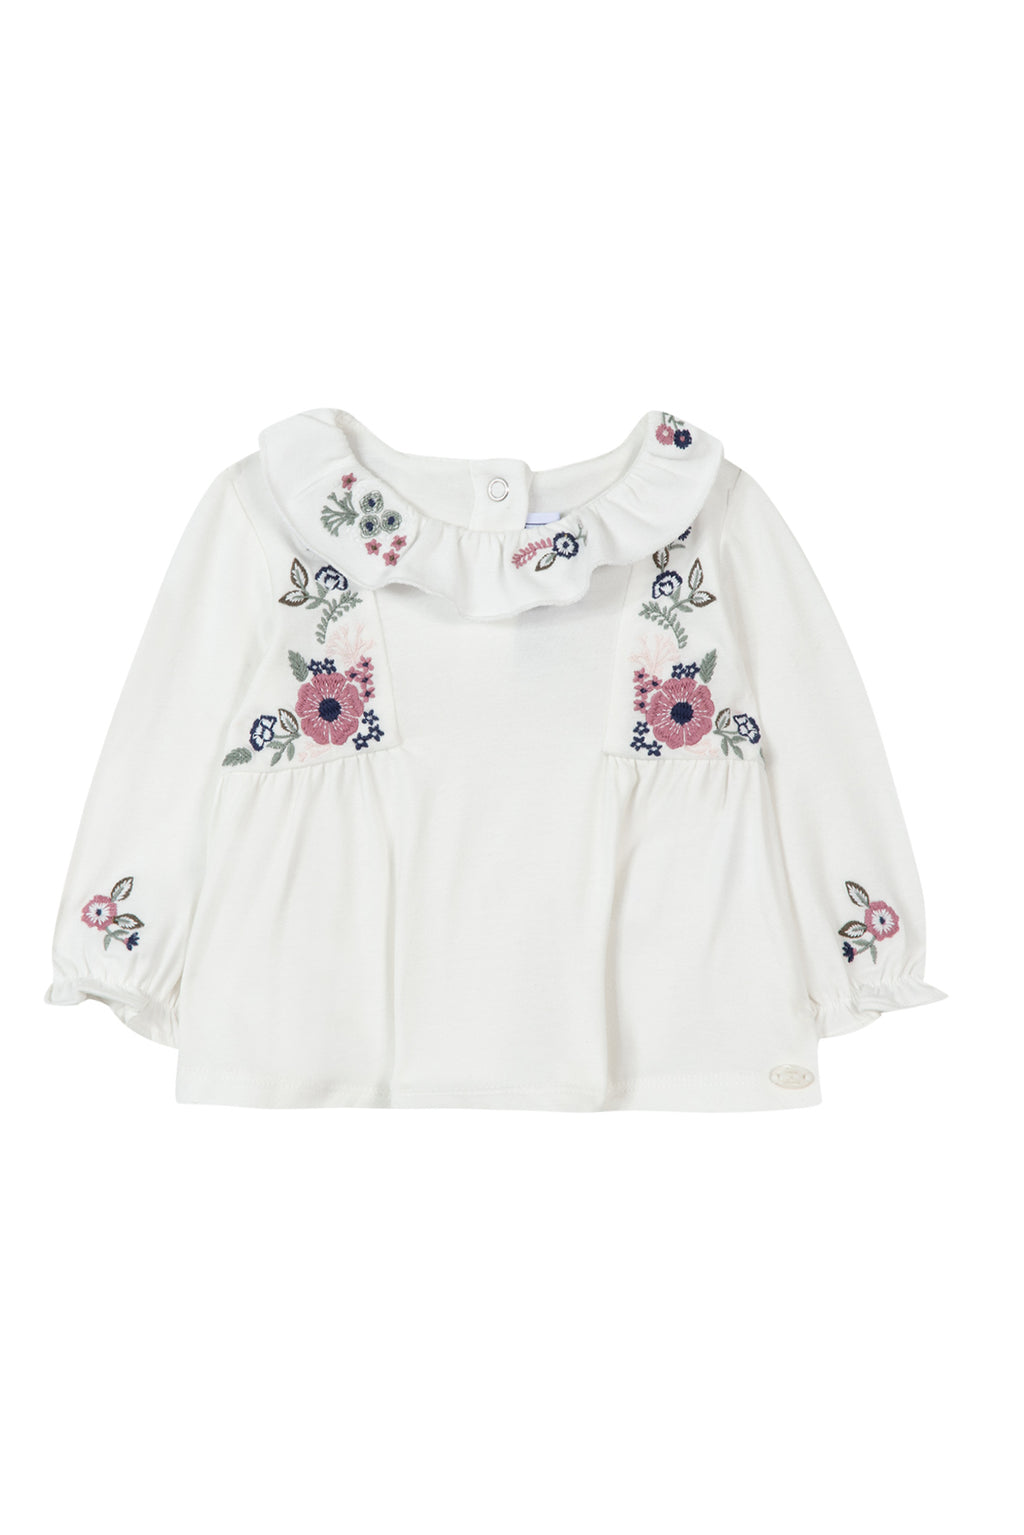 T-shirt - Mother-of-pearl Embrodery floral